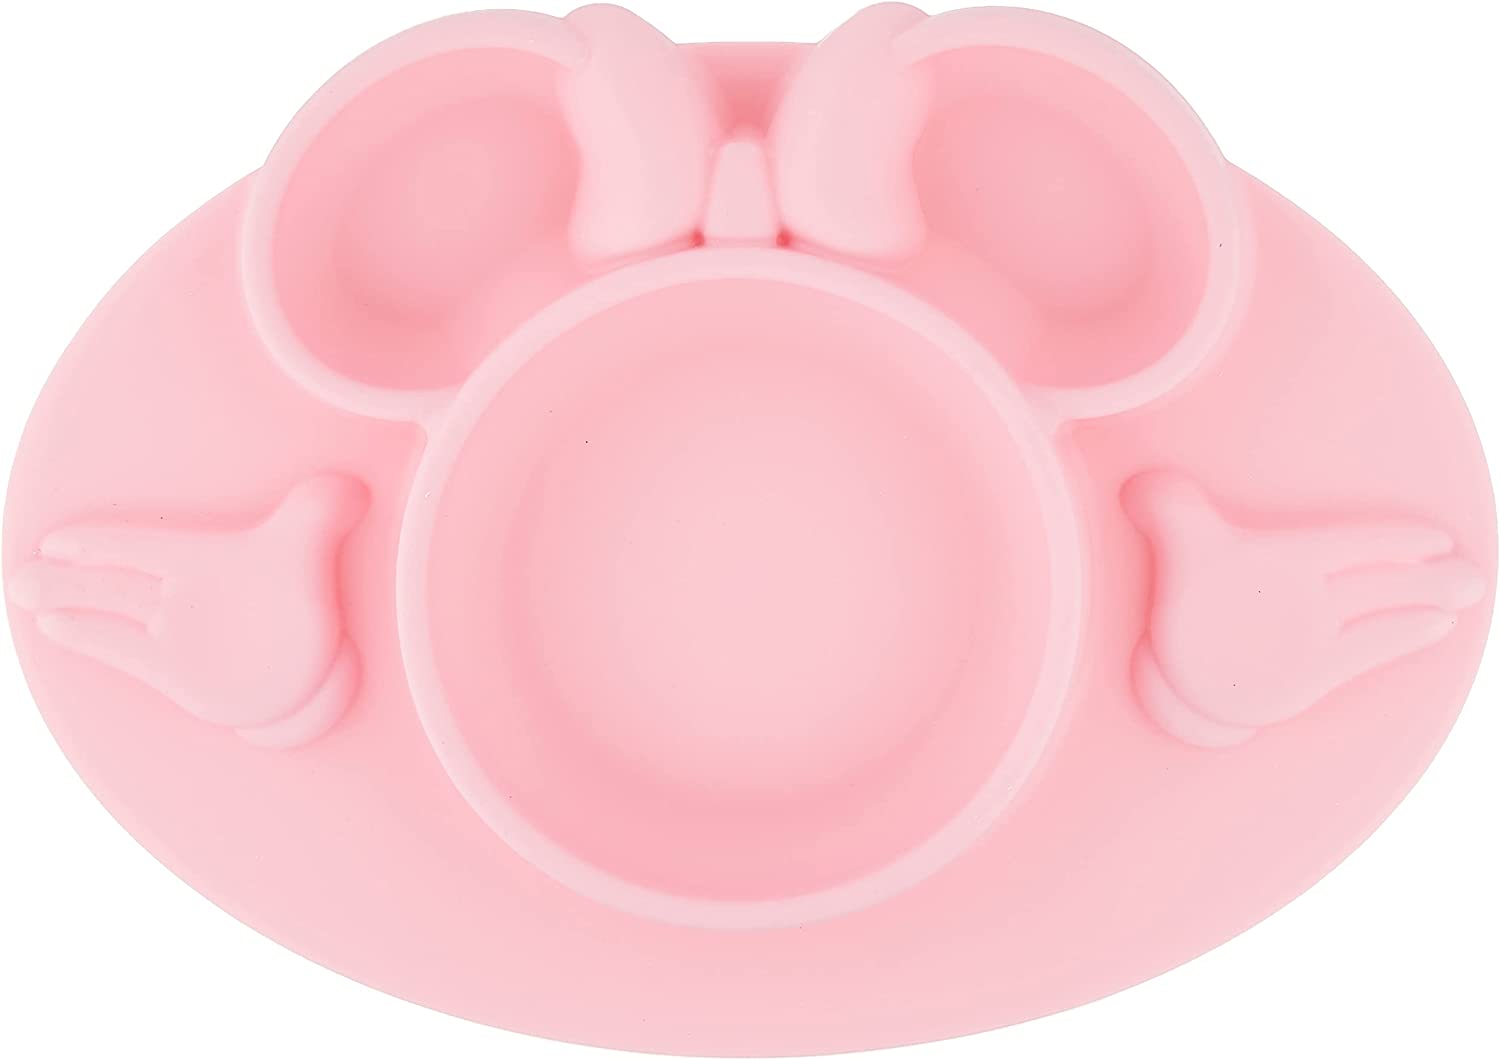 The First Years Disney Minnie Mouse Silicone Placemat, Pink